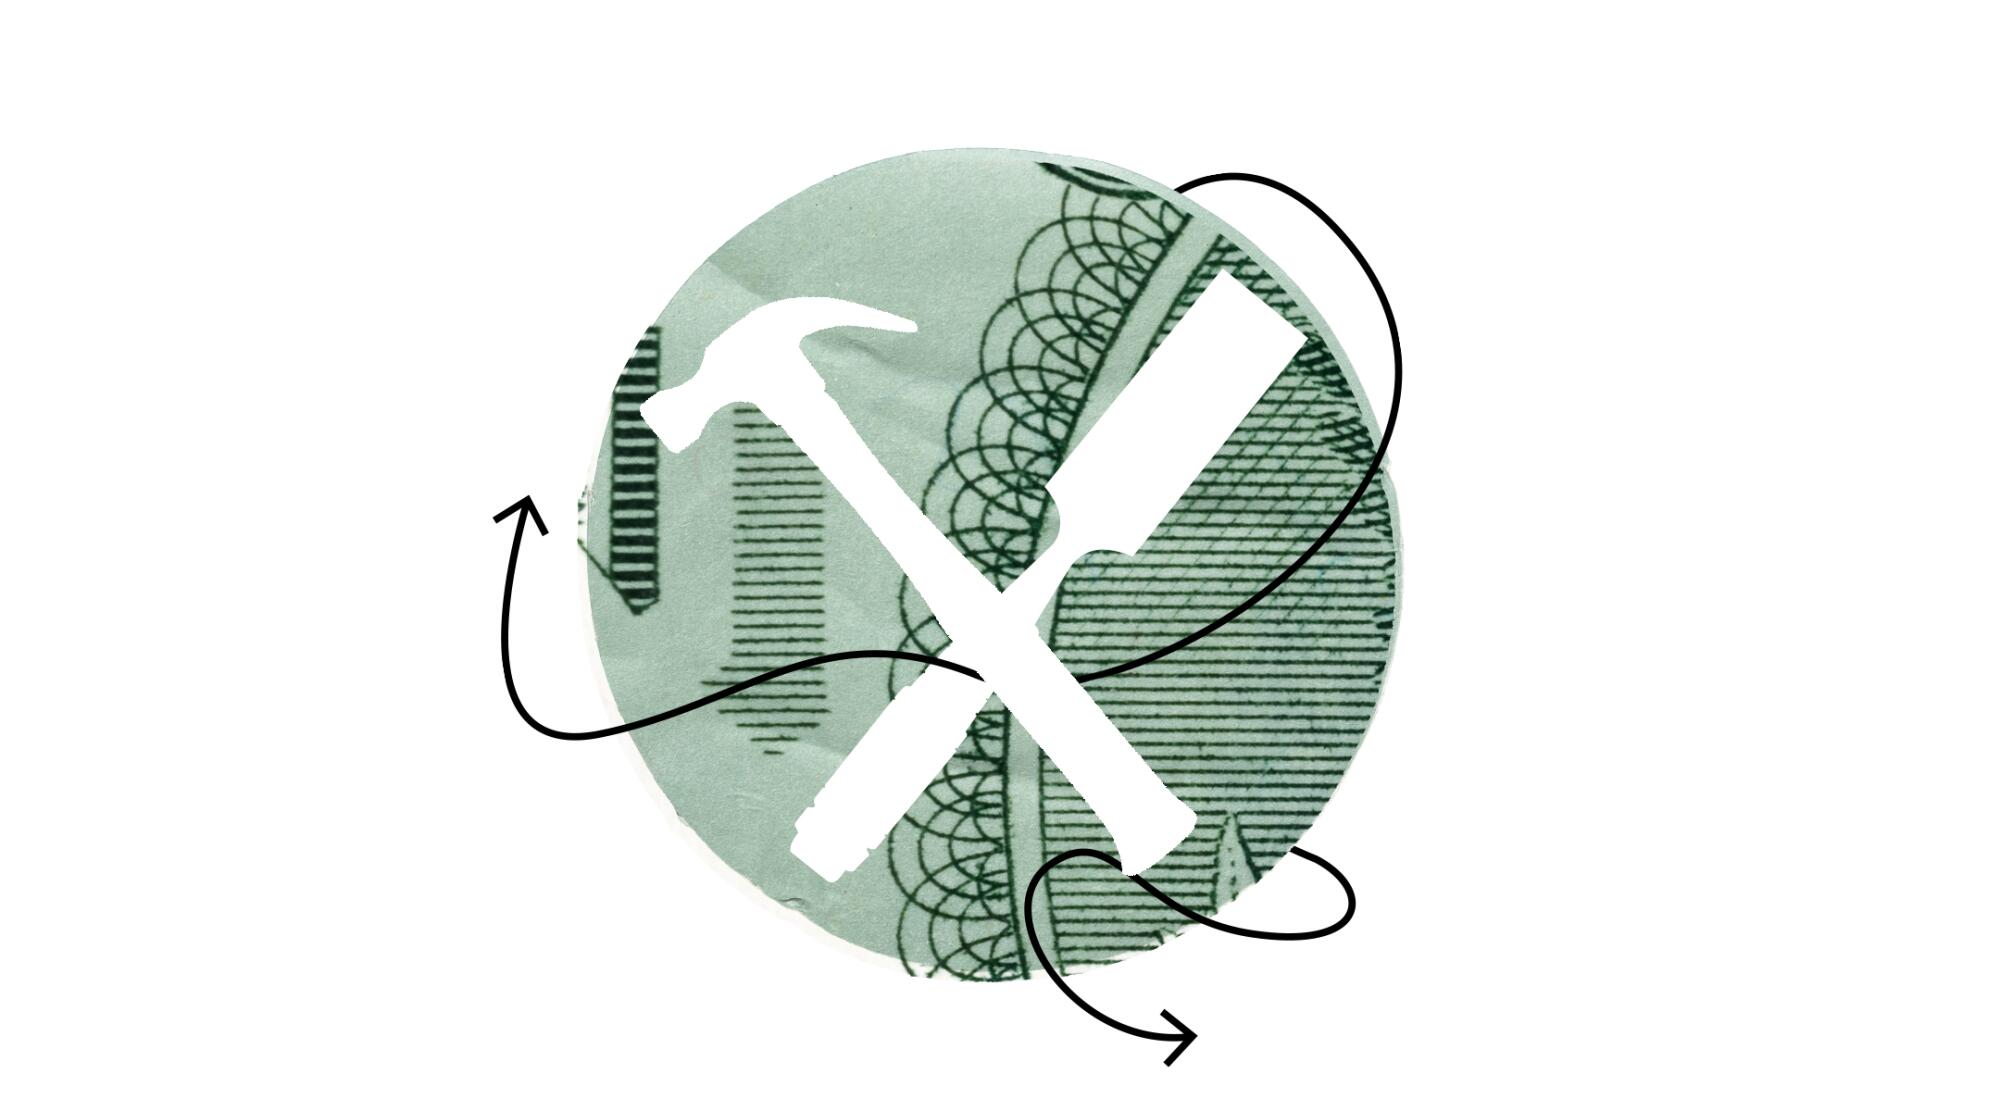 A circular cutout of a dollar bill encircled by arrows. A hammer and chisel in the middle.